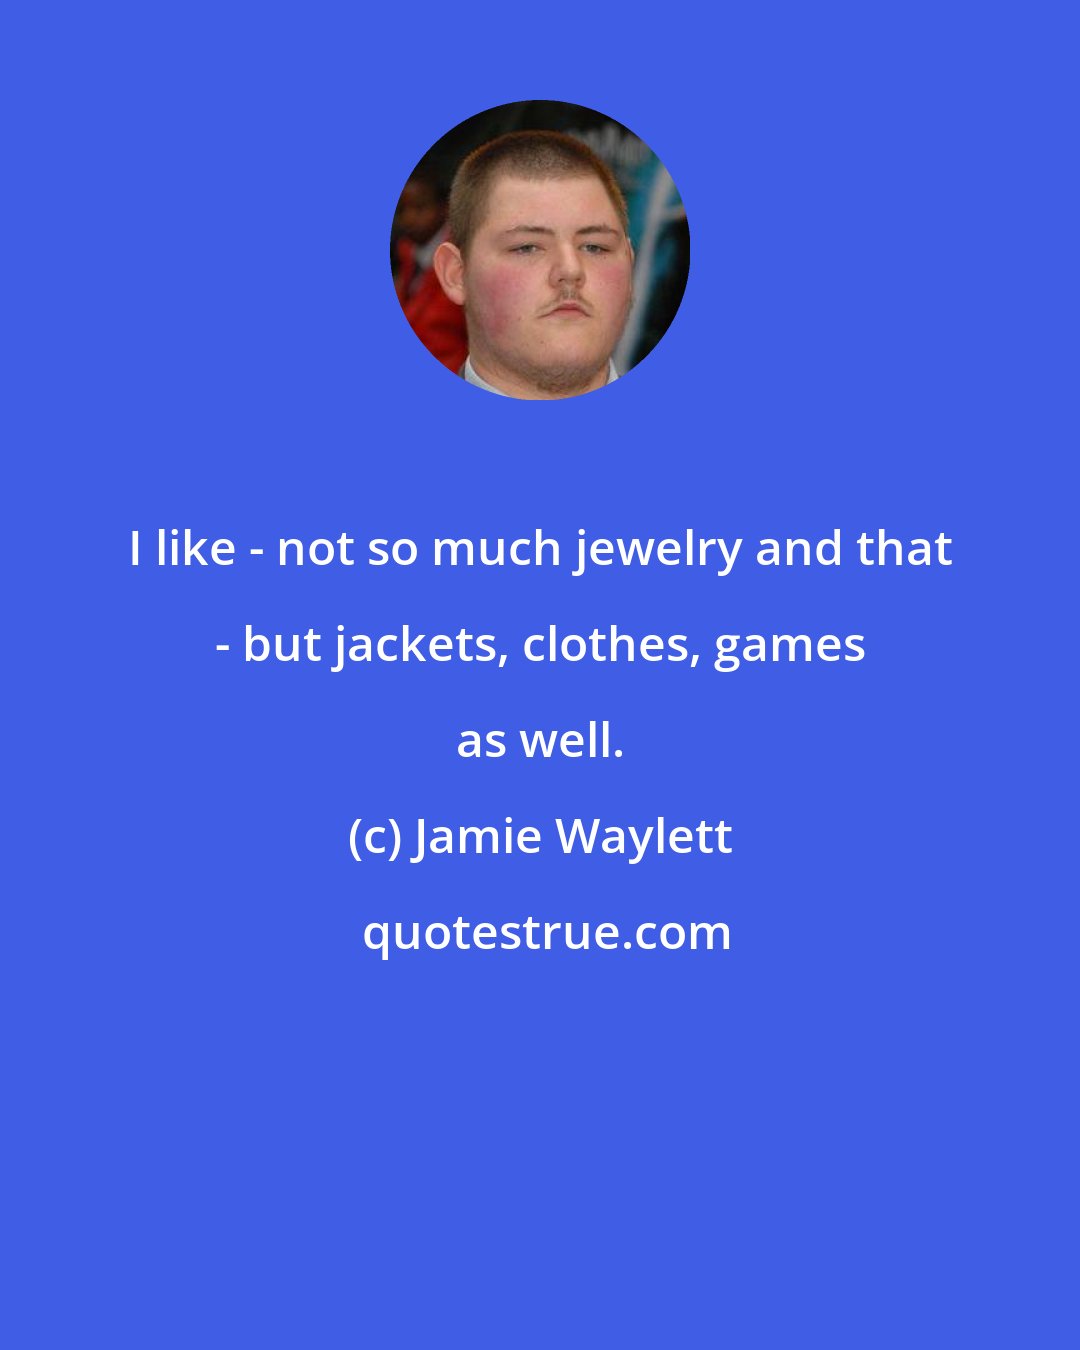 Jamie Waylett: I like - not so much jewelry and that - but jackets, clothes, games as well.